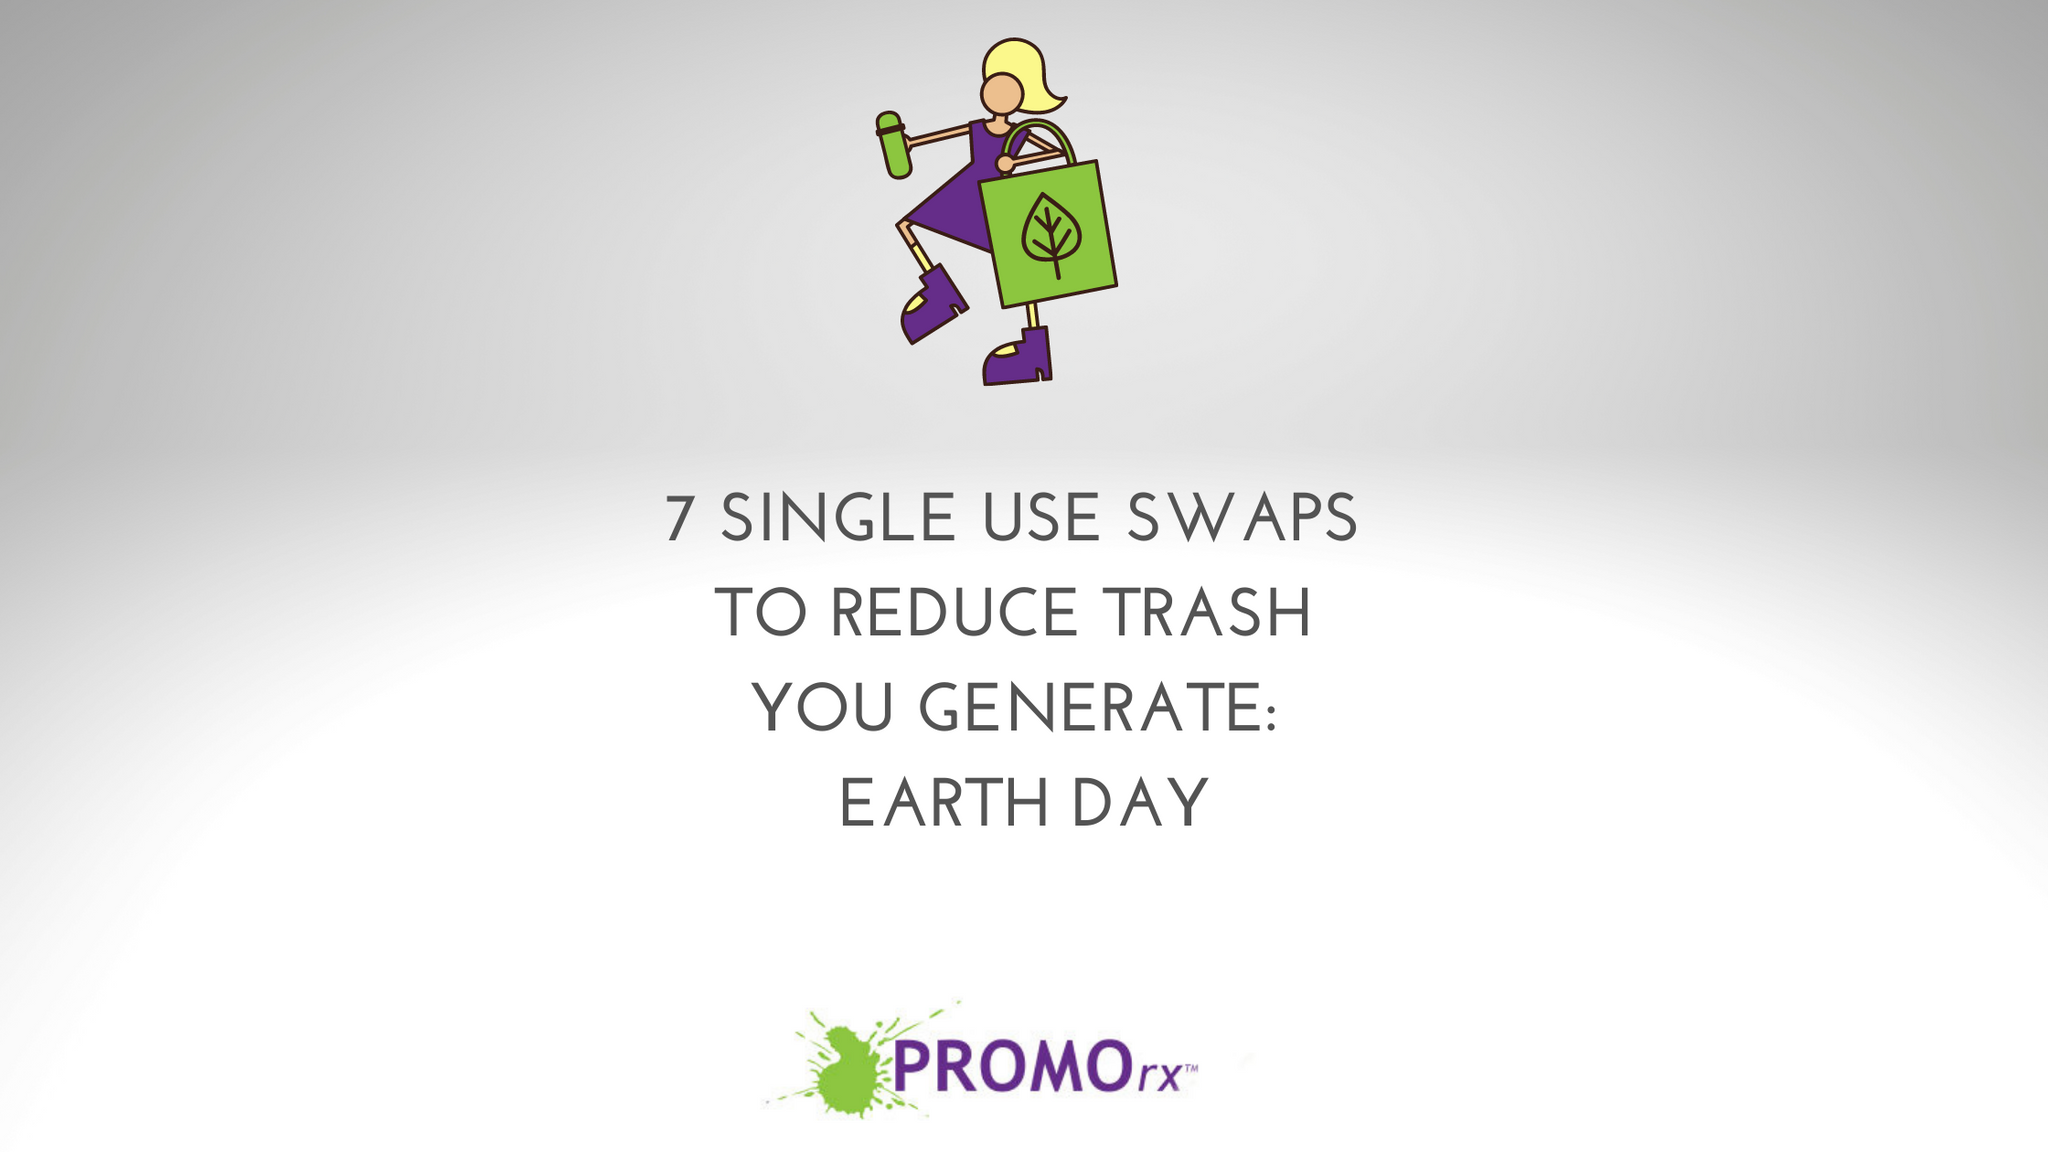 7 Single Use Swaps to Reduce Trash You Generate: Earth Day